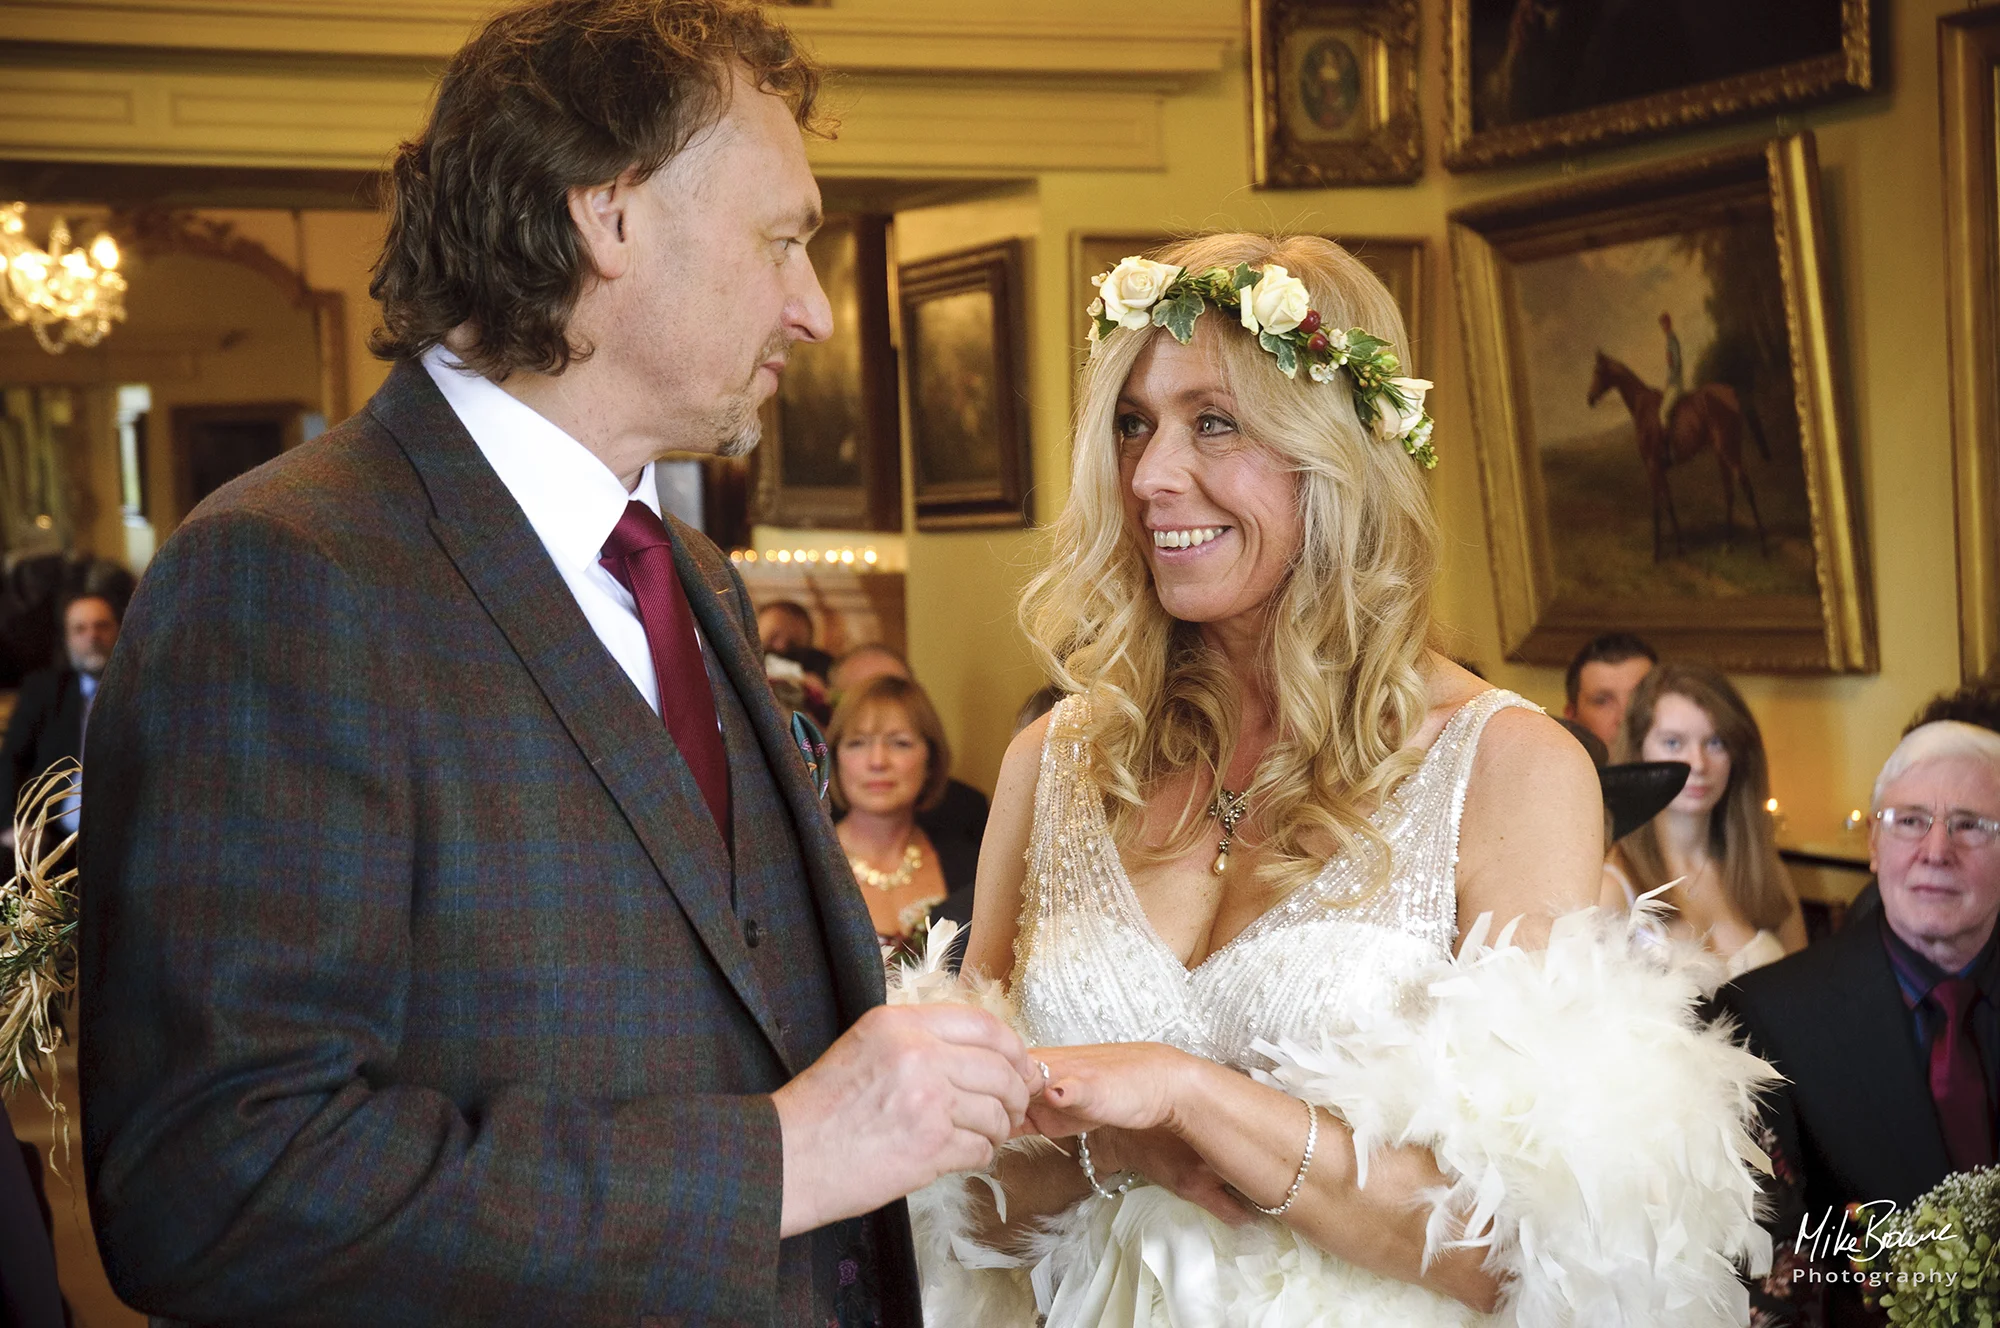 Man in a brown check suit and a woman wearing a wedding dress and flowers in her hair look at each other as he places a ring on her finger